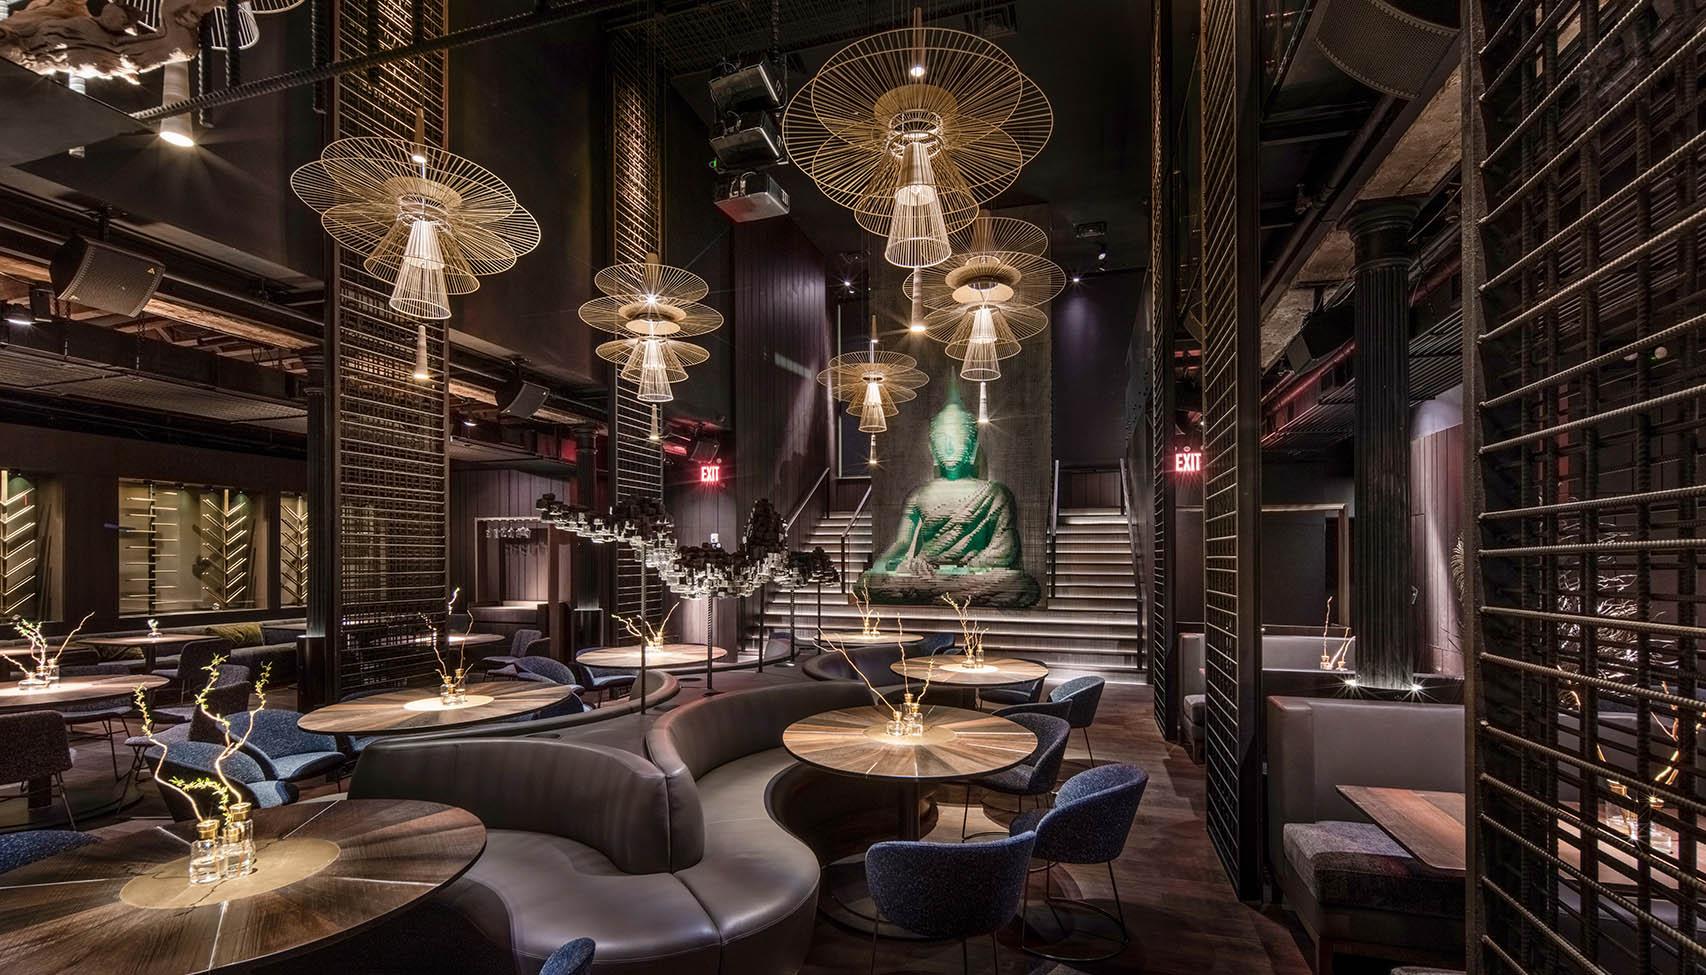 laurameroni made to measure wall panelling in metal and wood for the buddha bar in new york